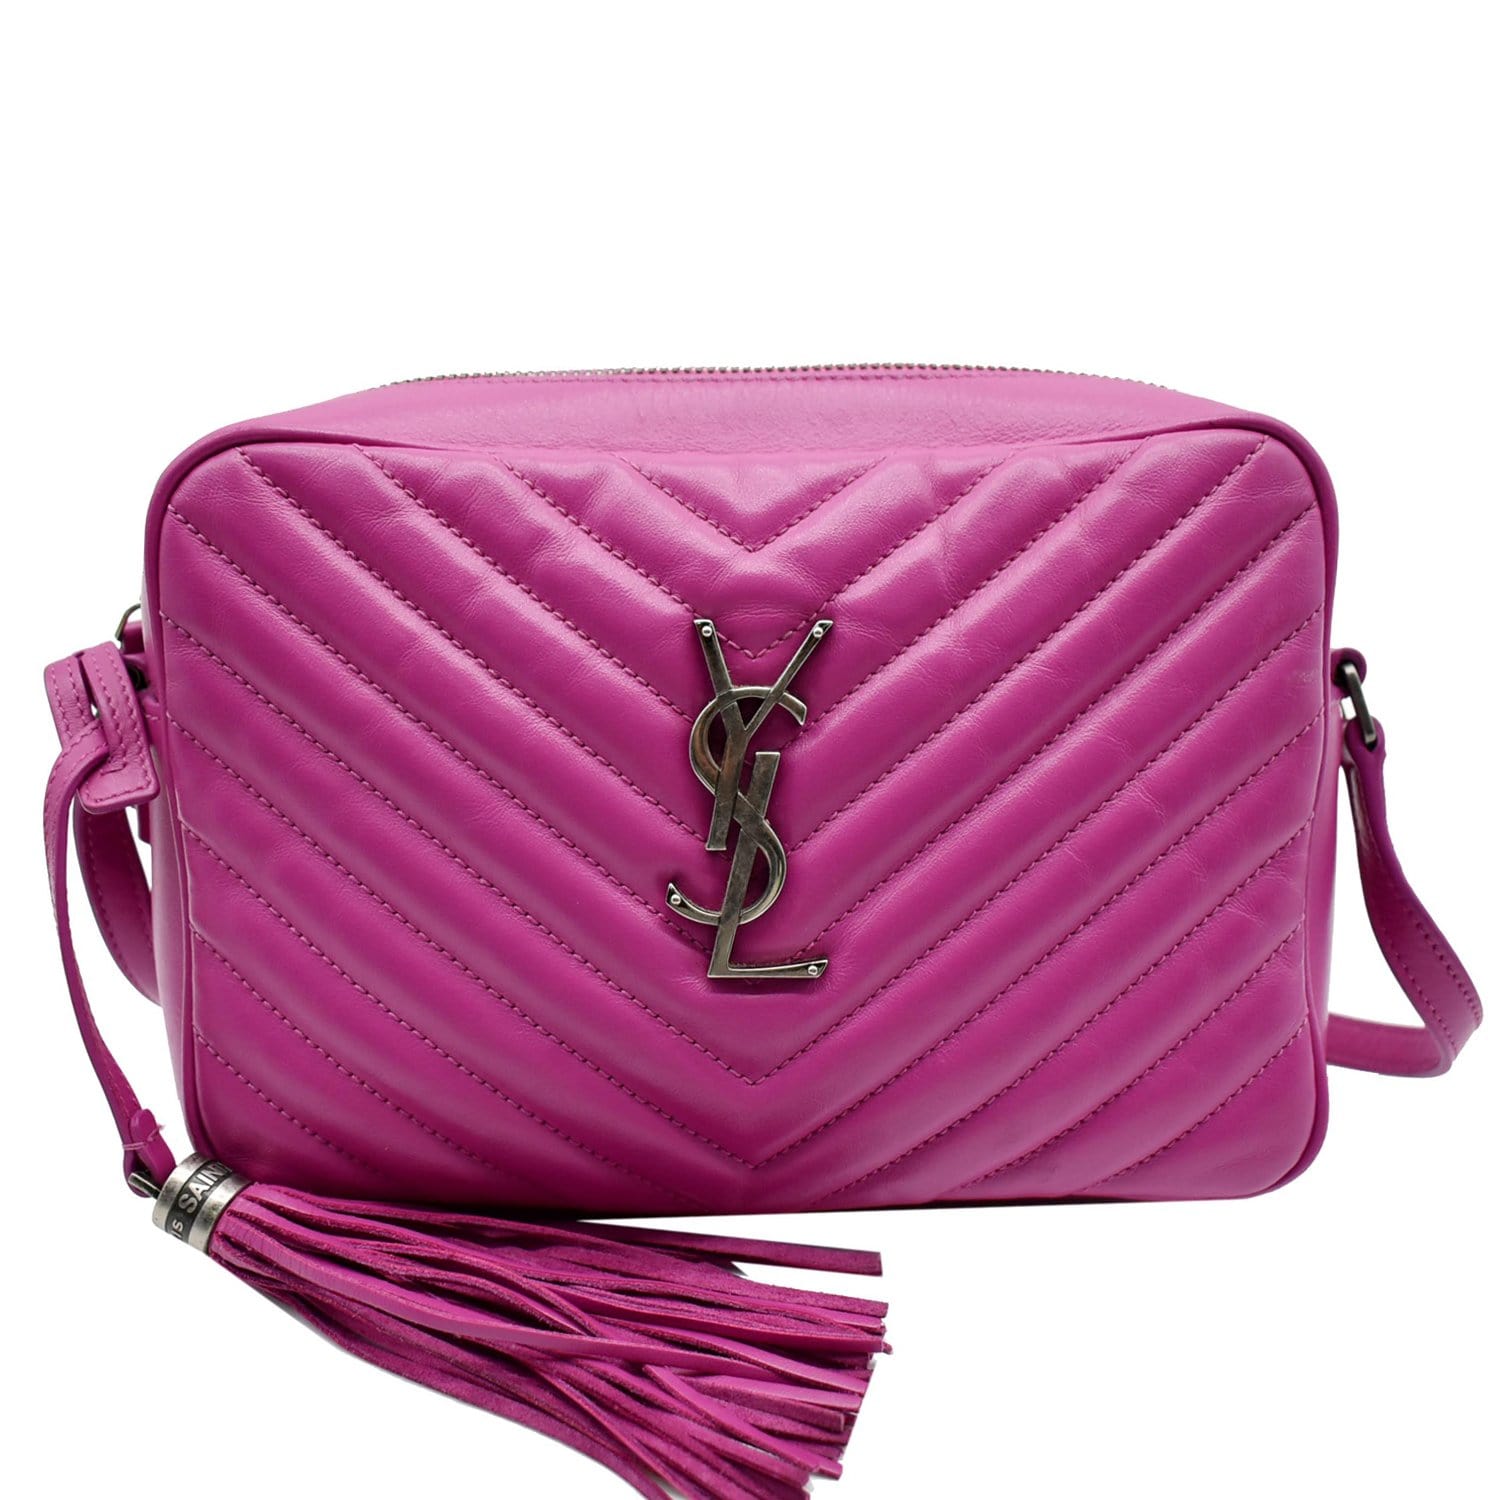 Rodéo pégase leather bag charm Hermès Pink in Leather - 31345458